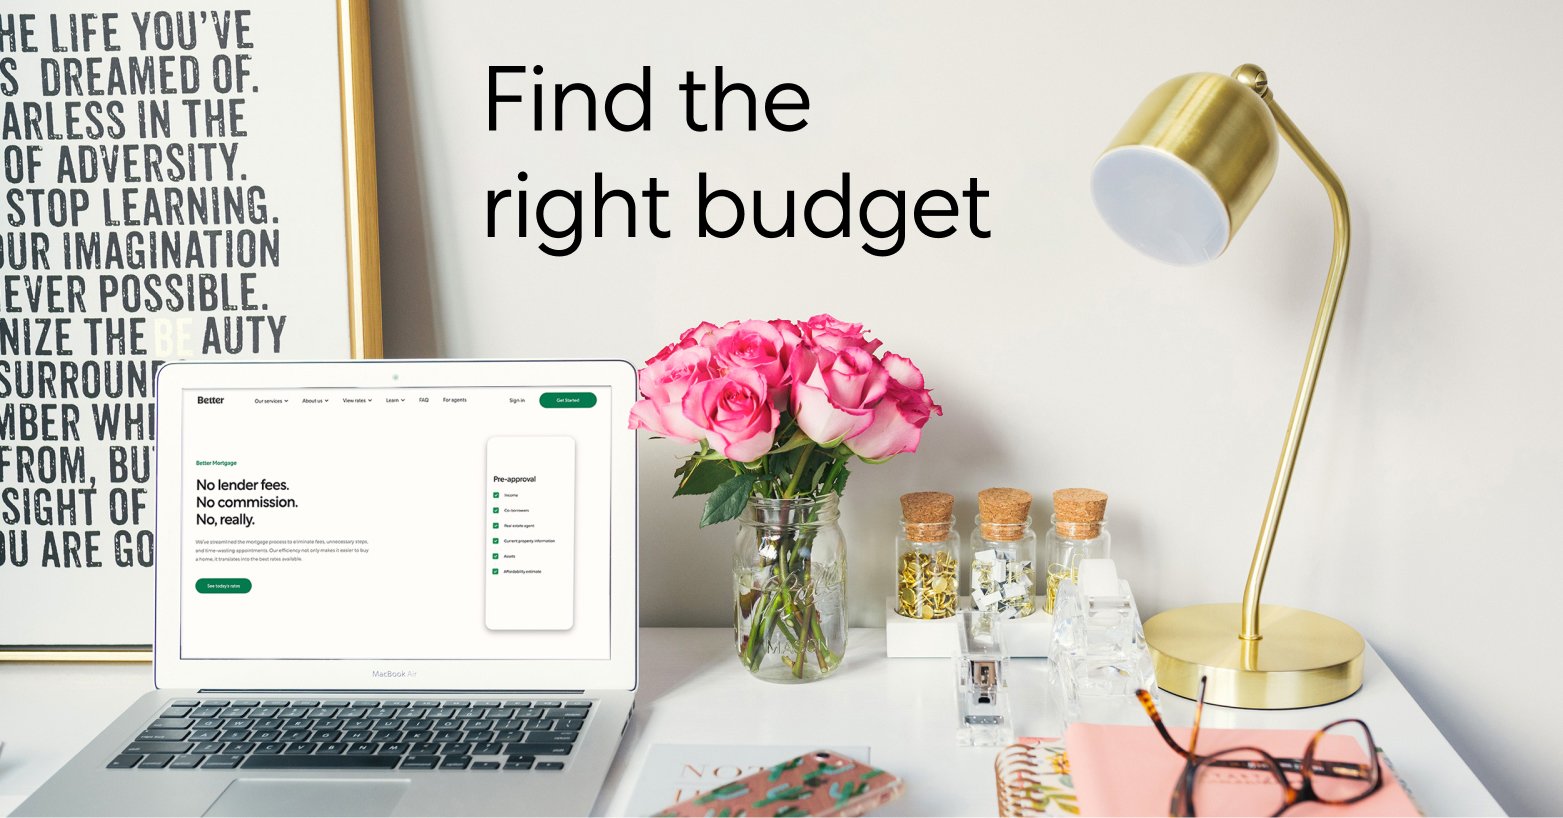  White Desk With Laptop, Bouquet of Pink Roses, Gold Lamp, Glasses, Office Supplies and Text in Background That Reads: Find the Right Budget